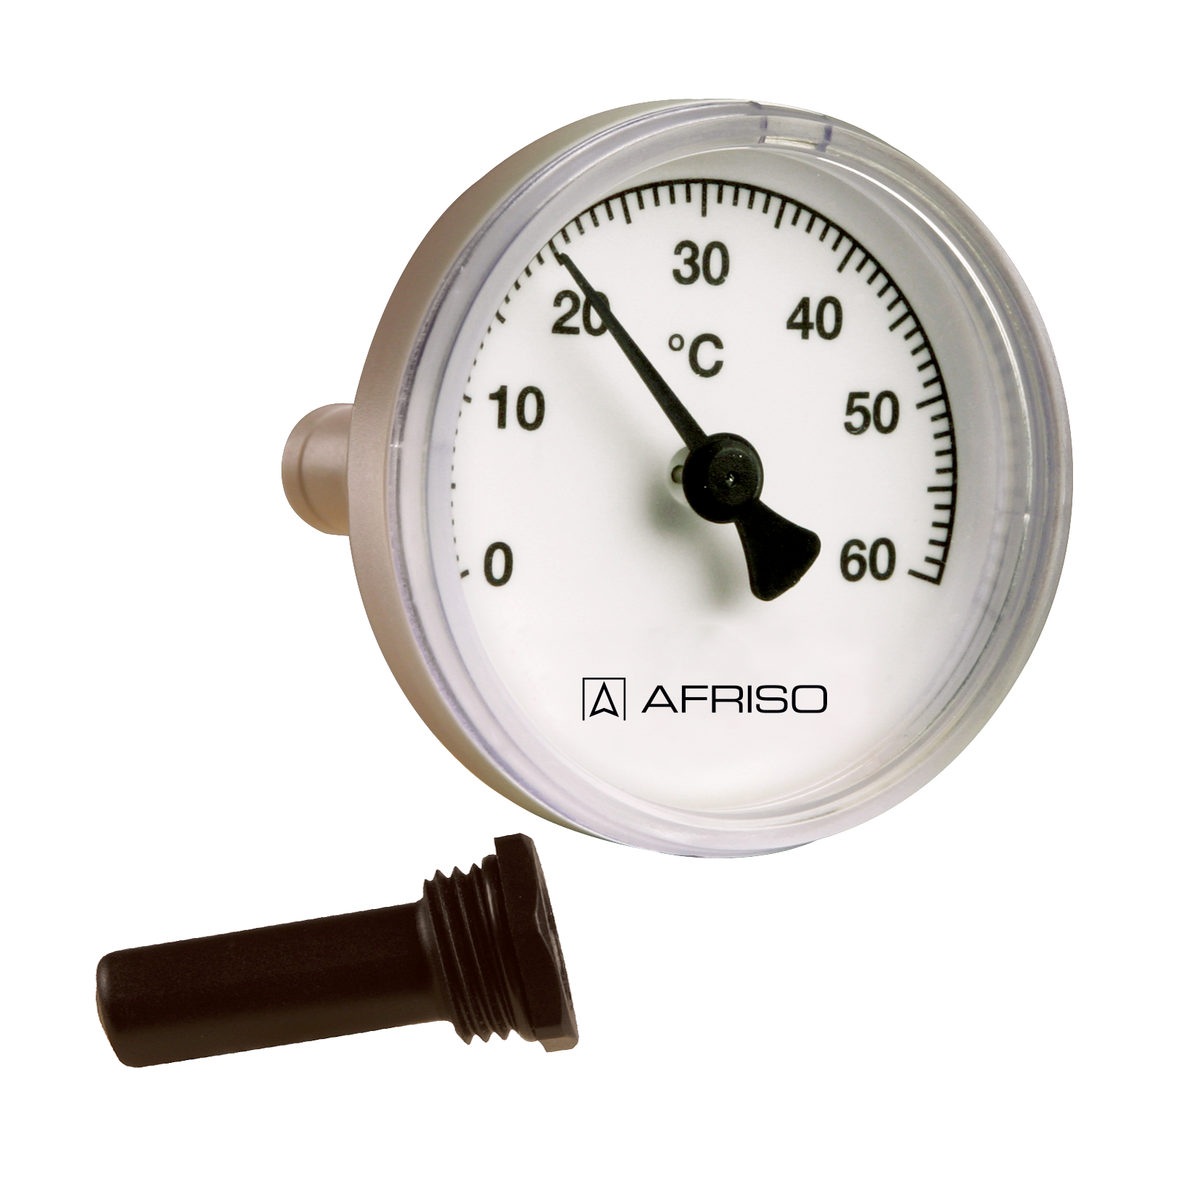 AFRISO Bimetall-Thermometer BiTh 50 K 0/60C 40mm 1/2 axial Kl.2 SAL 87720 object_image_57154imagemain_en